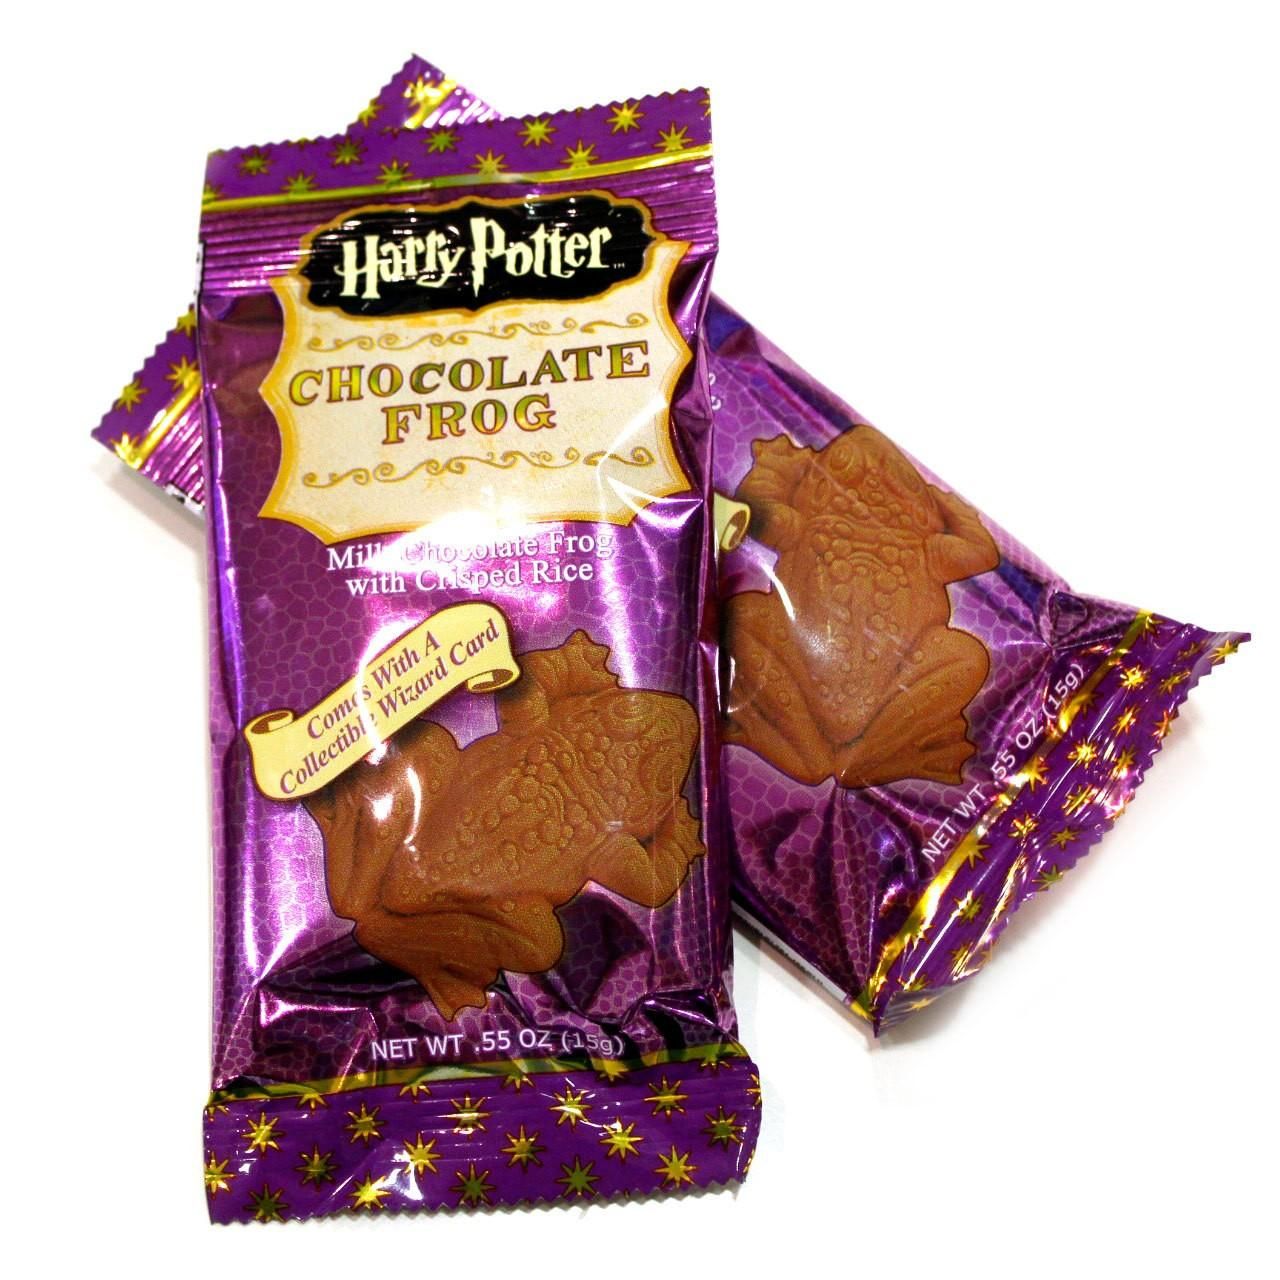 Harry Potter - Jelly Belly Chocolate Frog